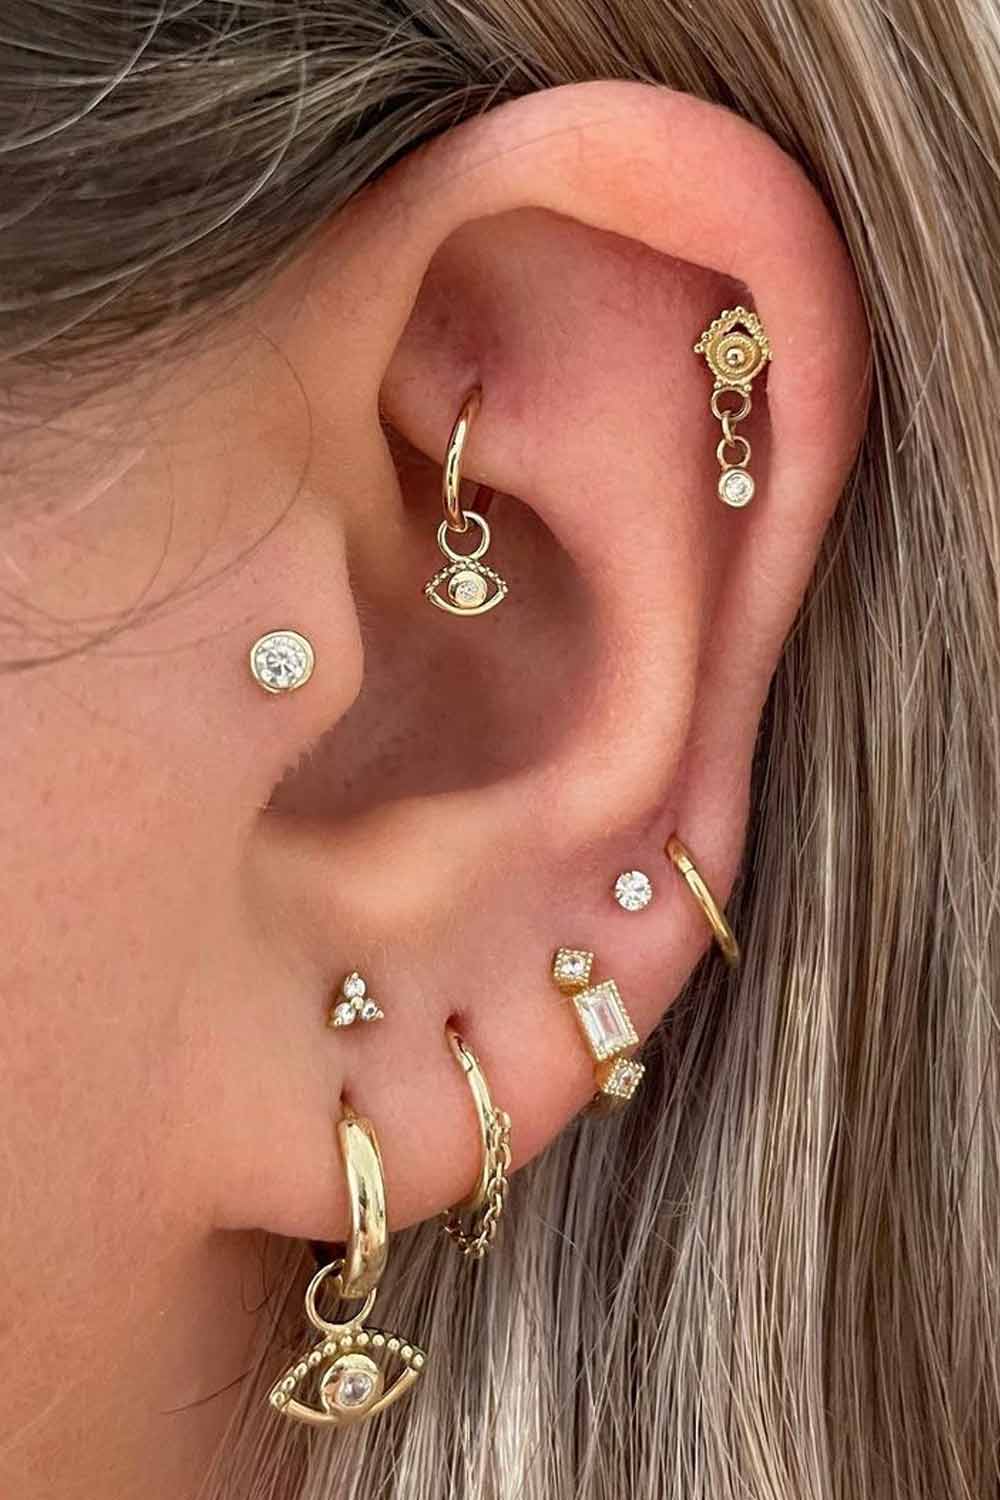 Accessories and Jewelry for Different Types of Piercings